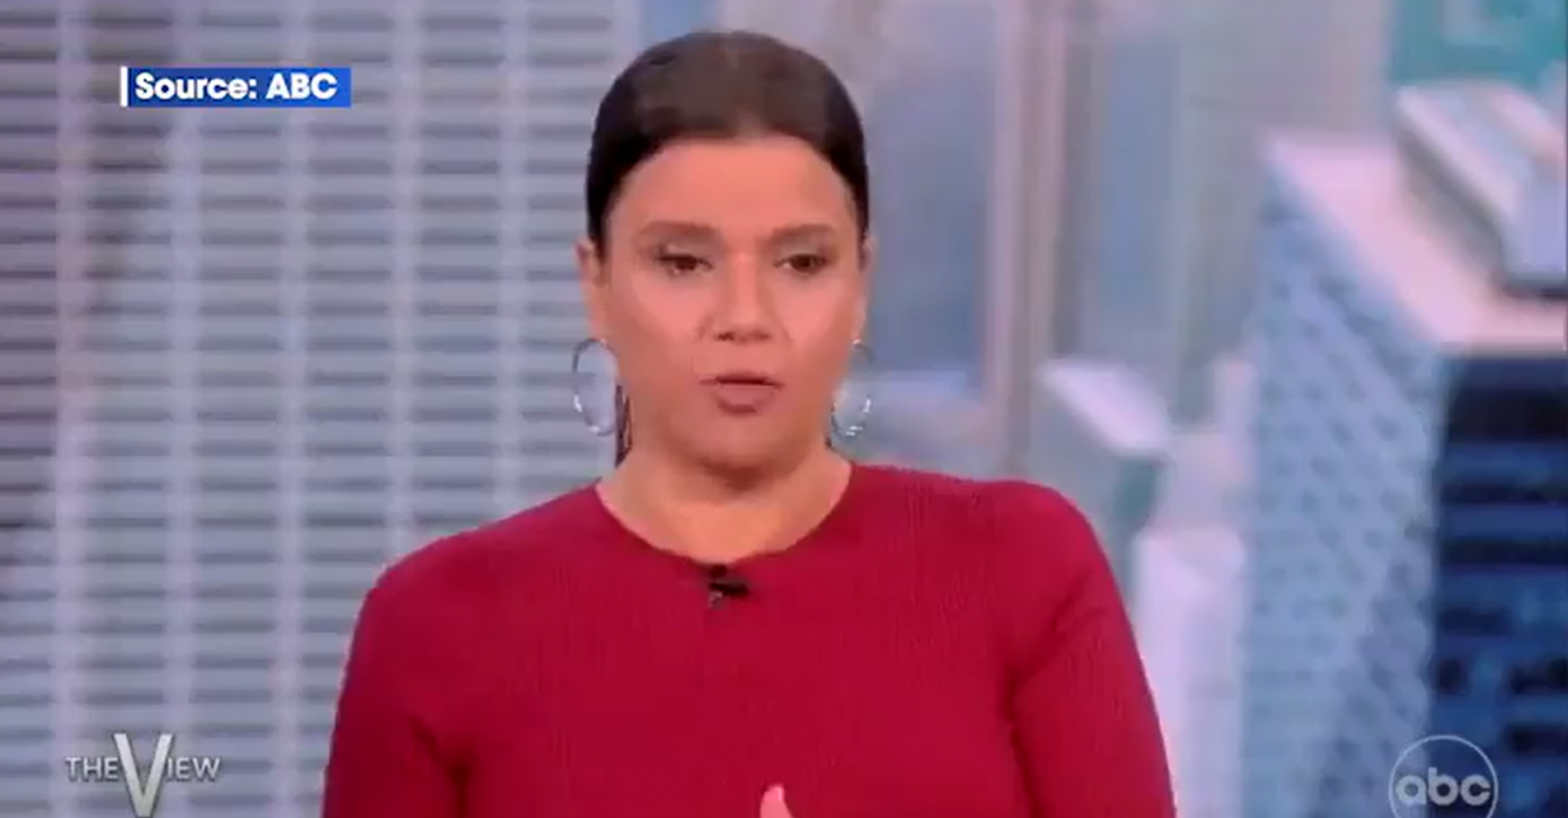 Ana Navarro trolled for calling Hunter Biden row “story of a father’s love”